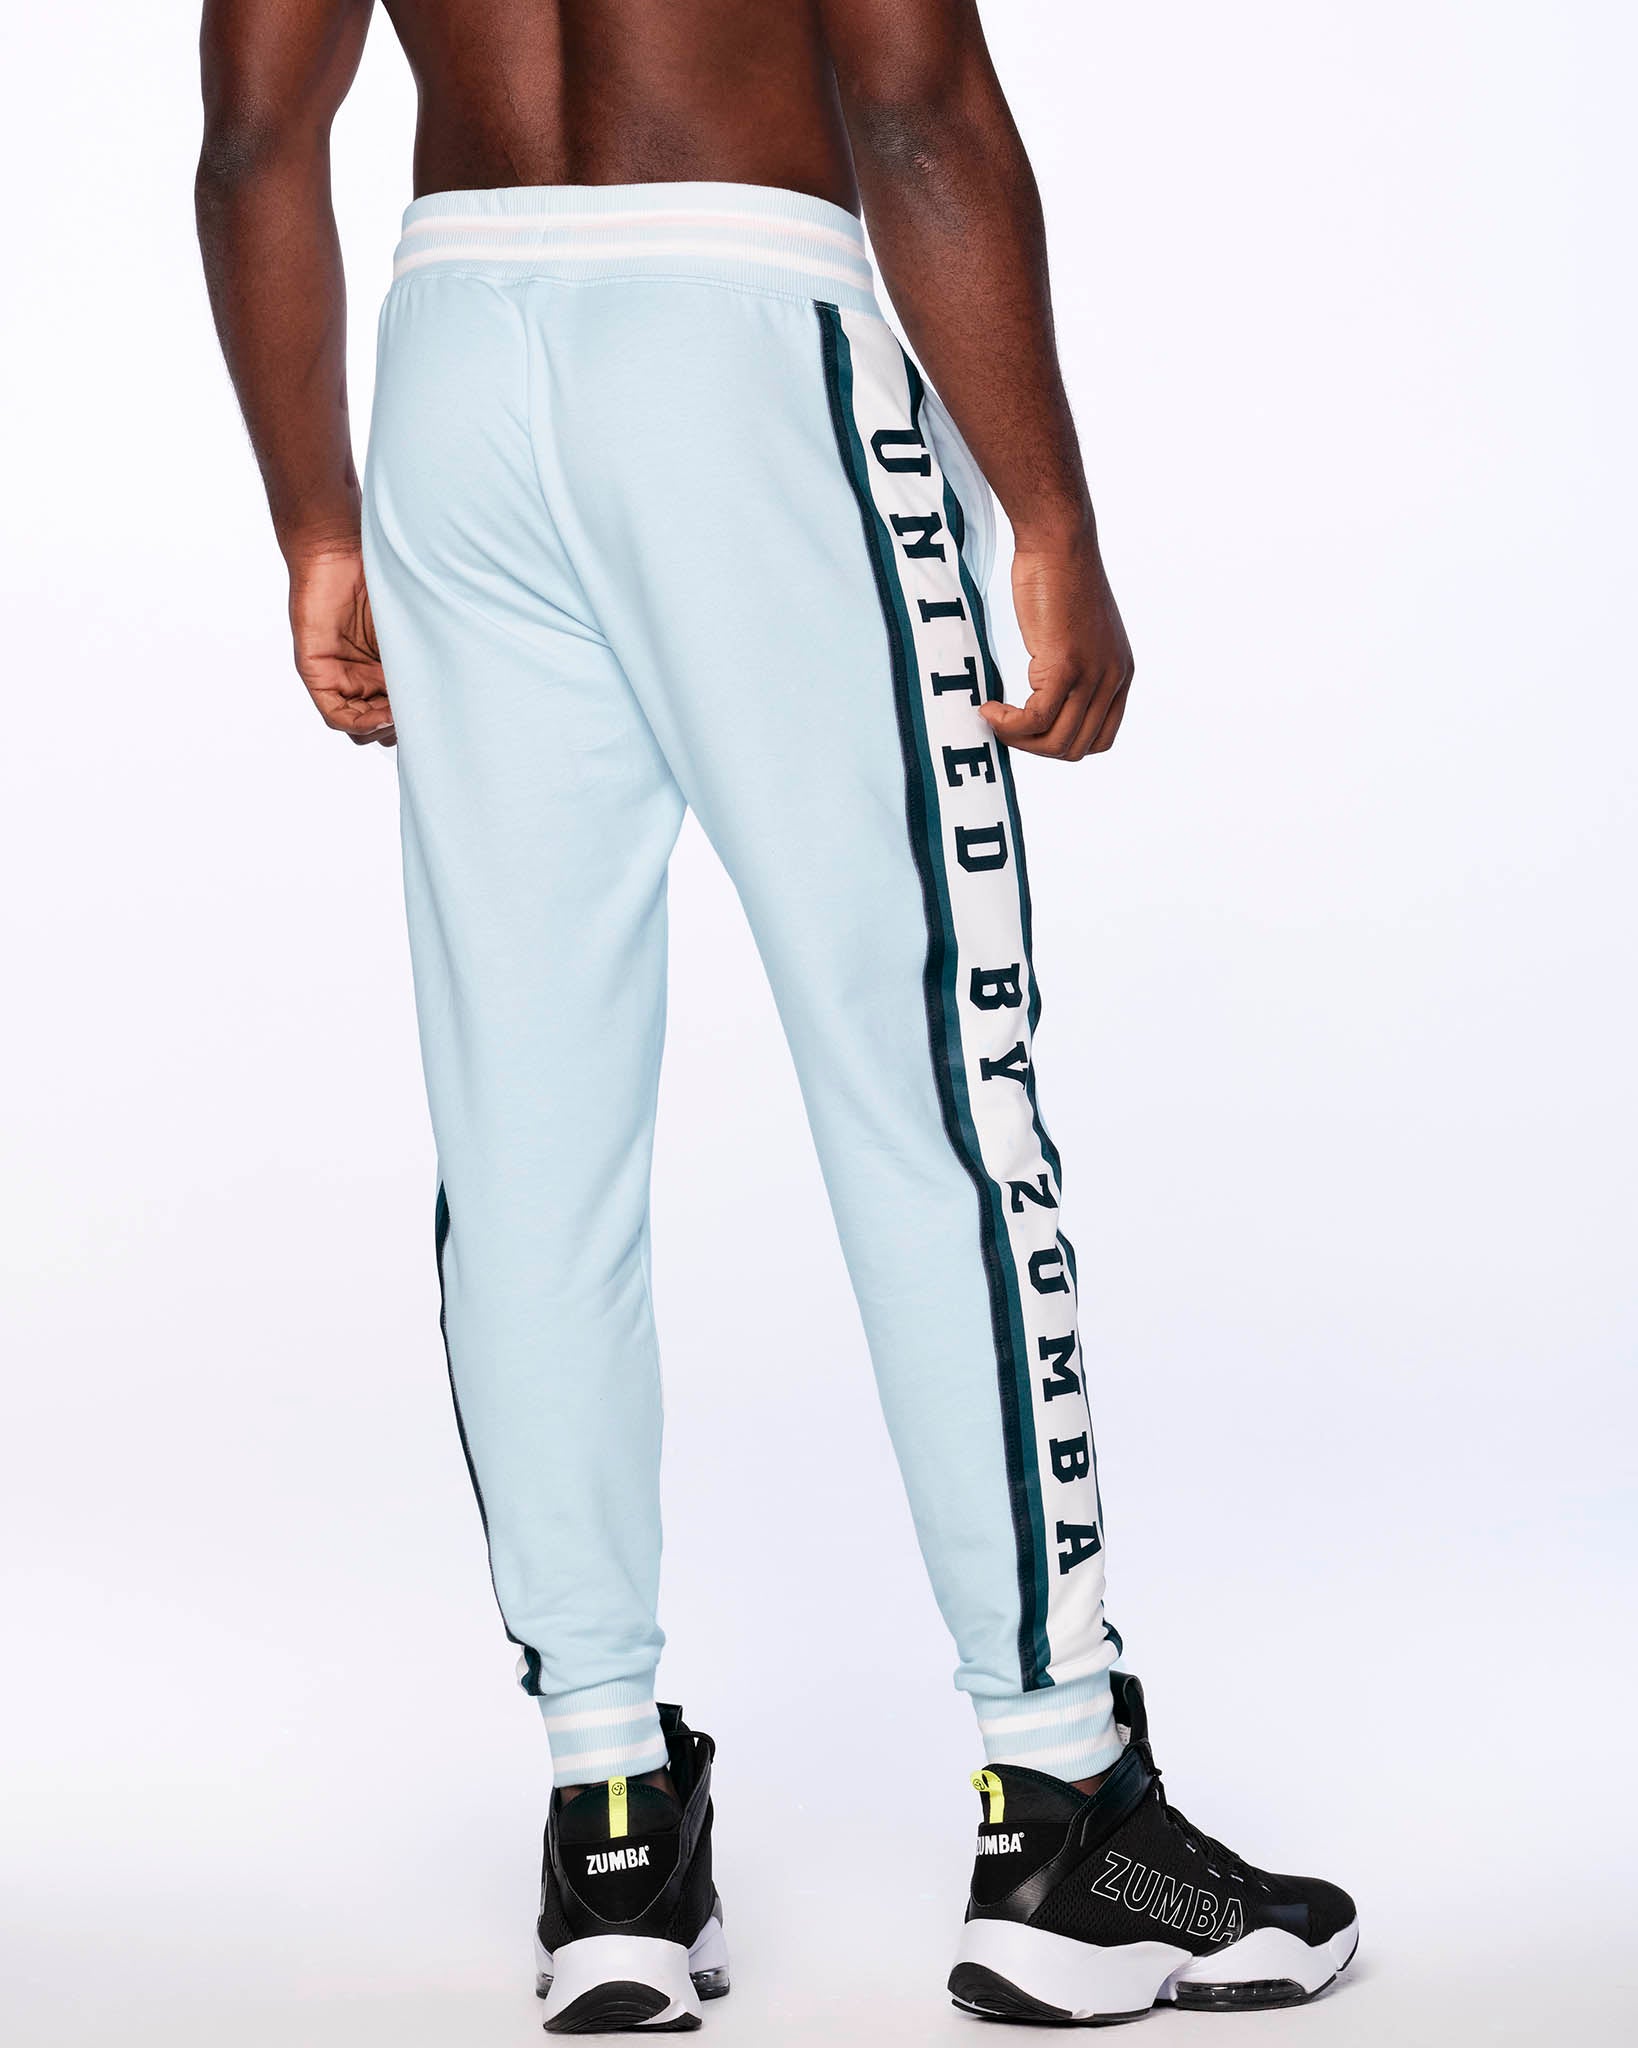 Zumba Stand Together Jogger Sweatpants